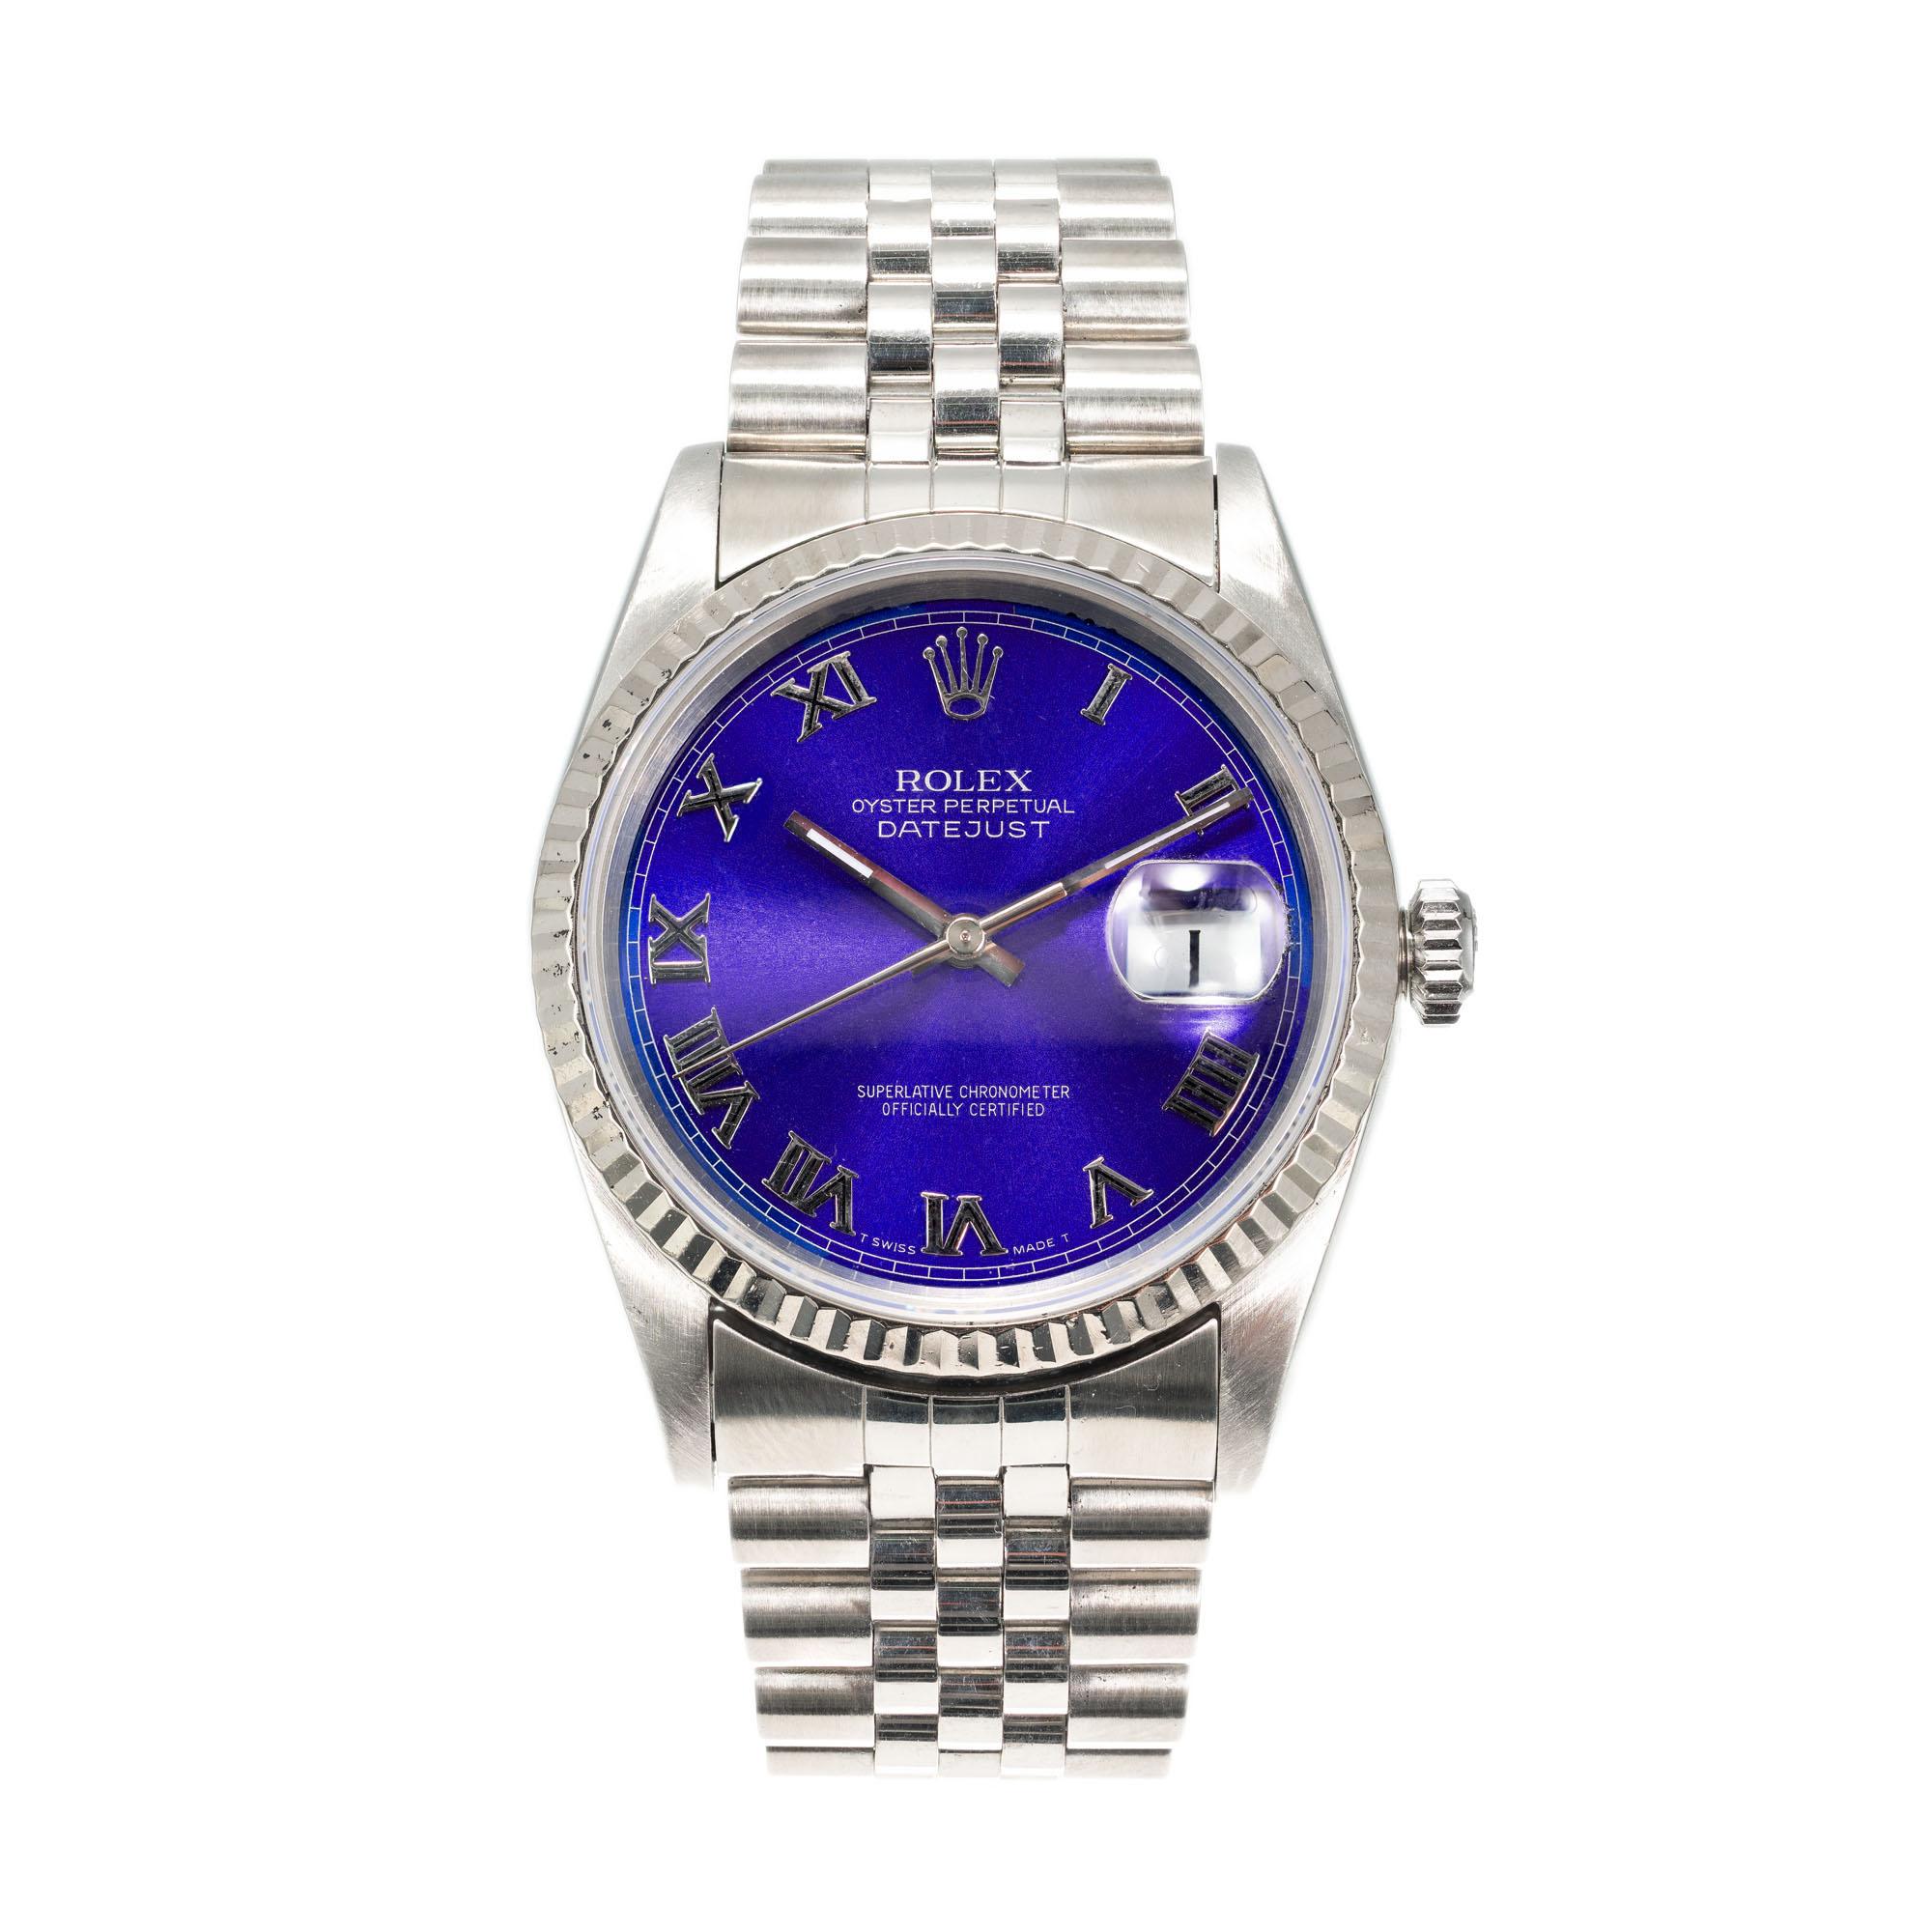 Stainless-steel Rolex Datejust model 16234 with 18k white gold bezel. Custom colored rich blue Rolex dial with Roman numerals. Sapphire crystal and Jubilee band.

18k white gold
Stainless steel
96.2 grams
Length: 8.5 inches and easily